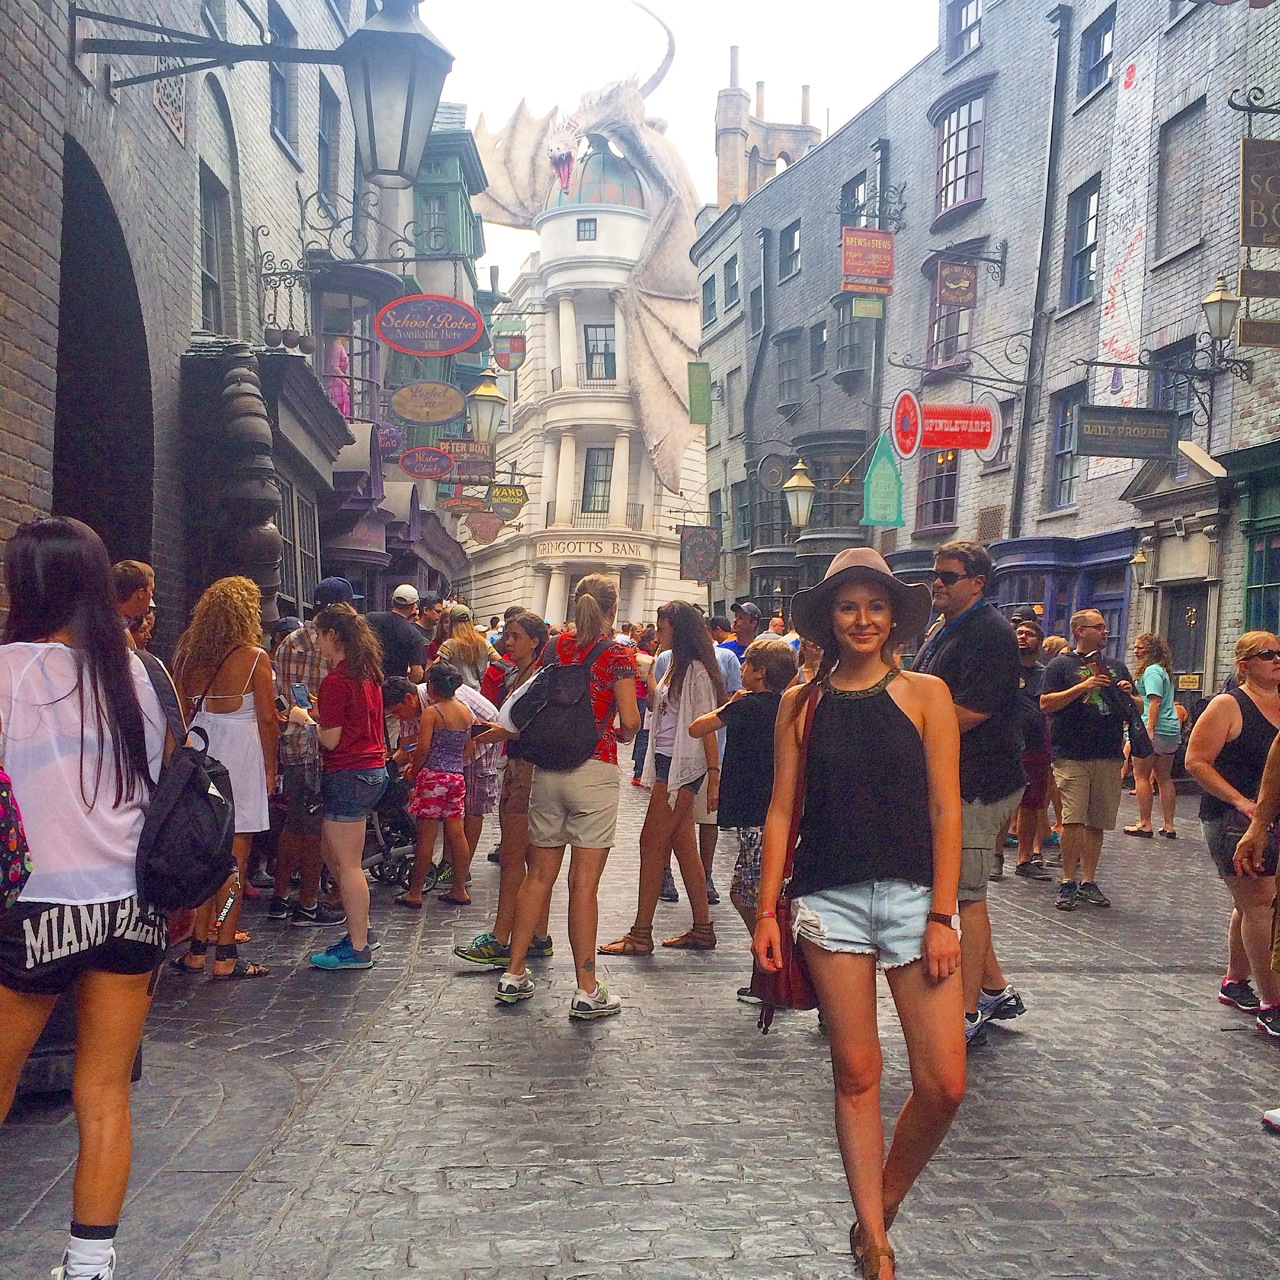 Diagon Alley wizarding world of harry potter